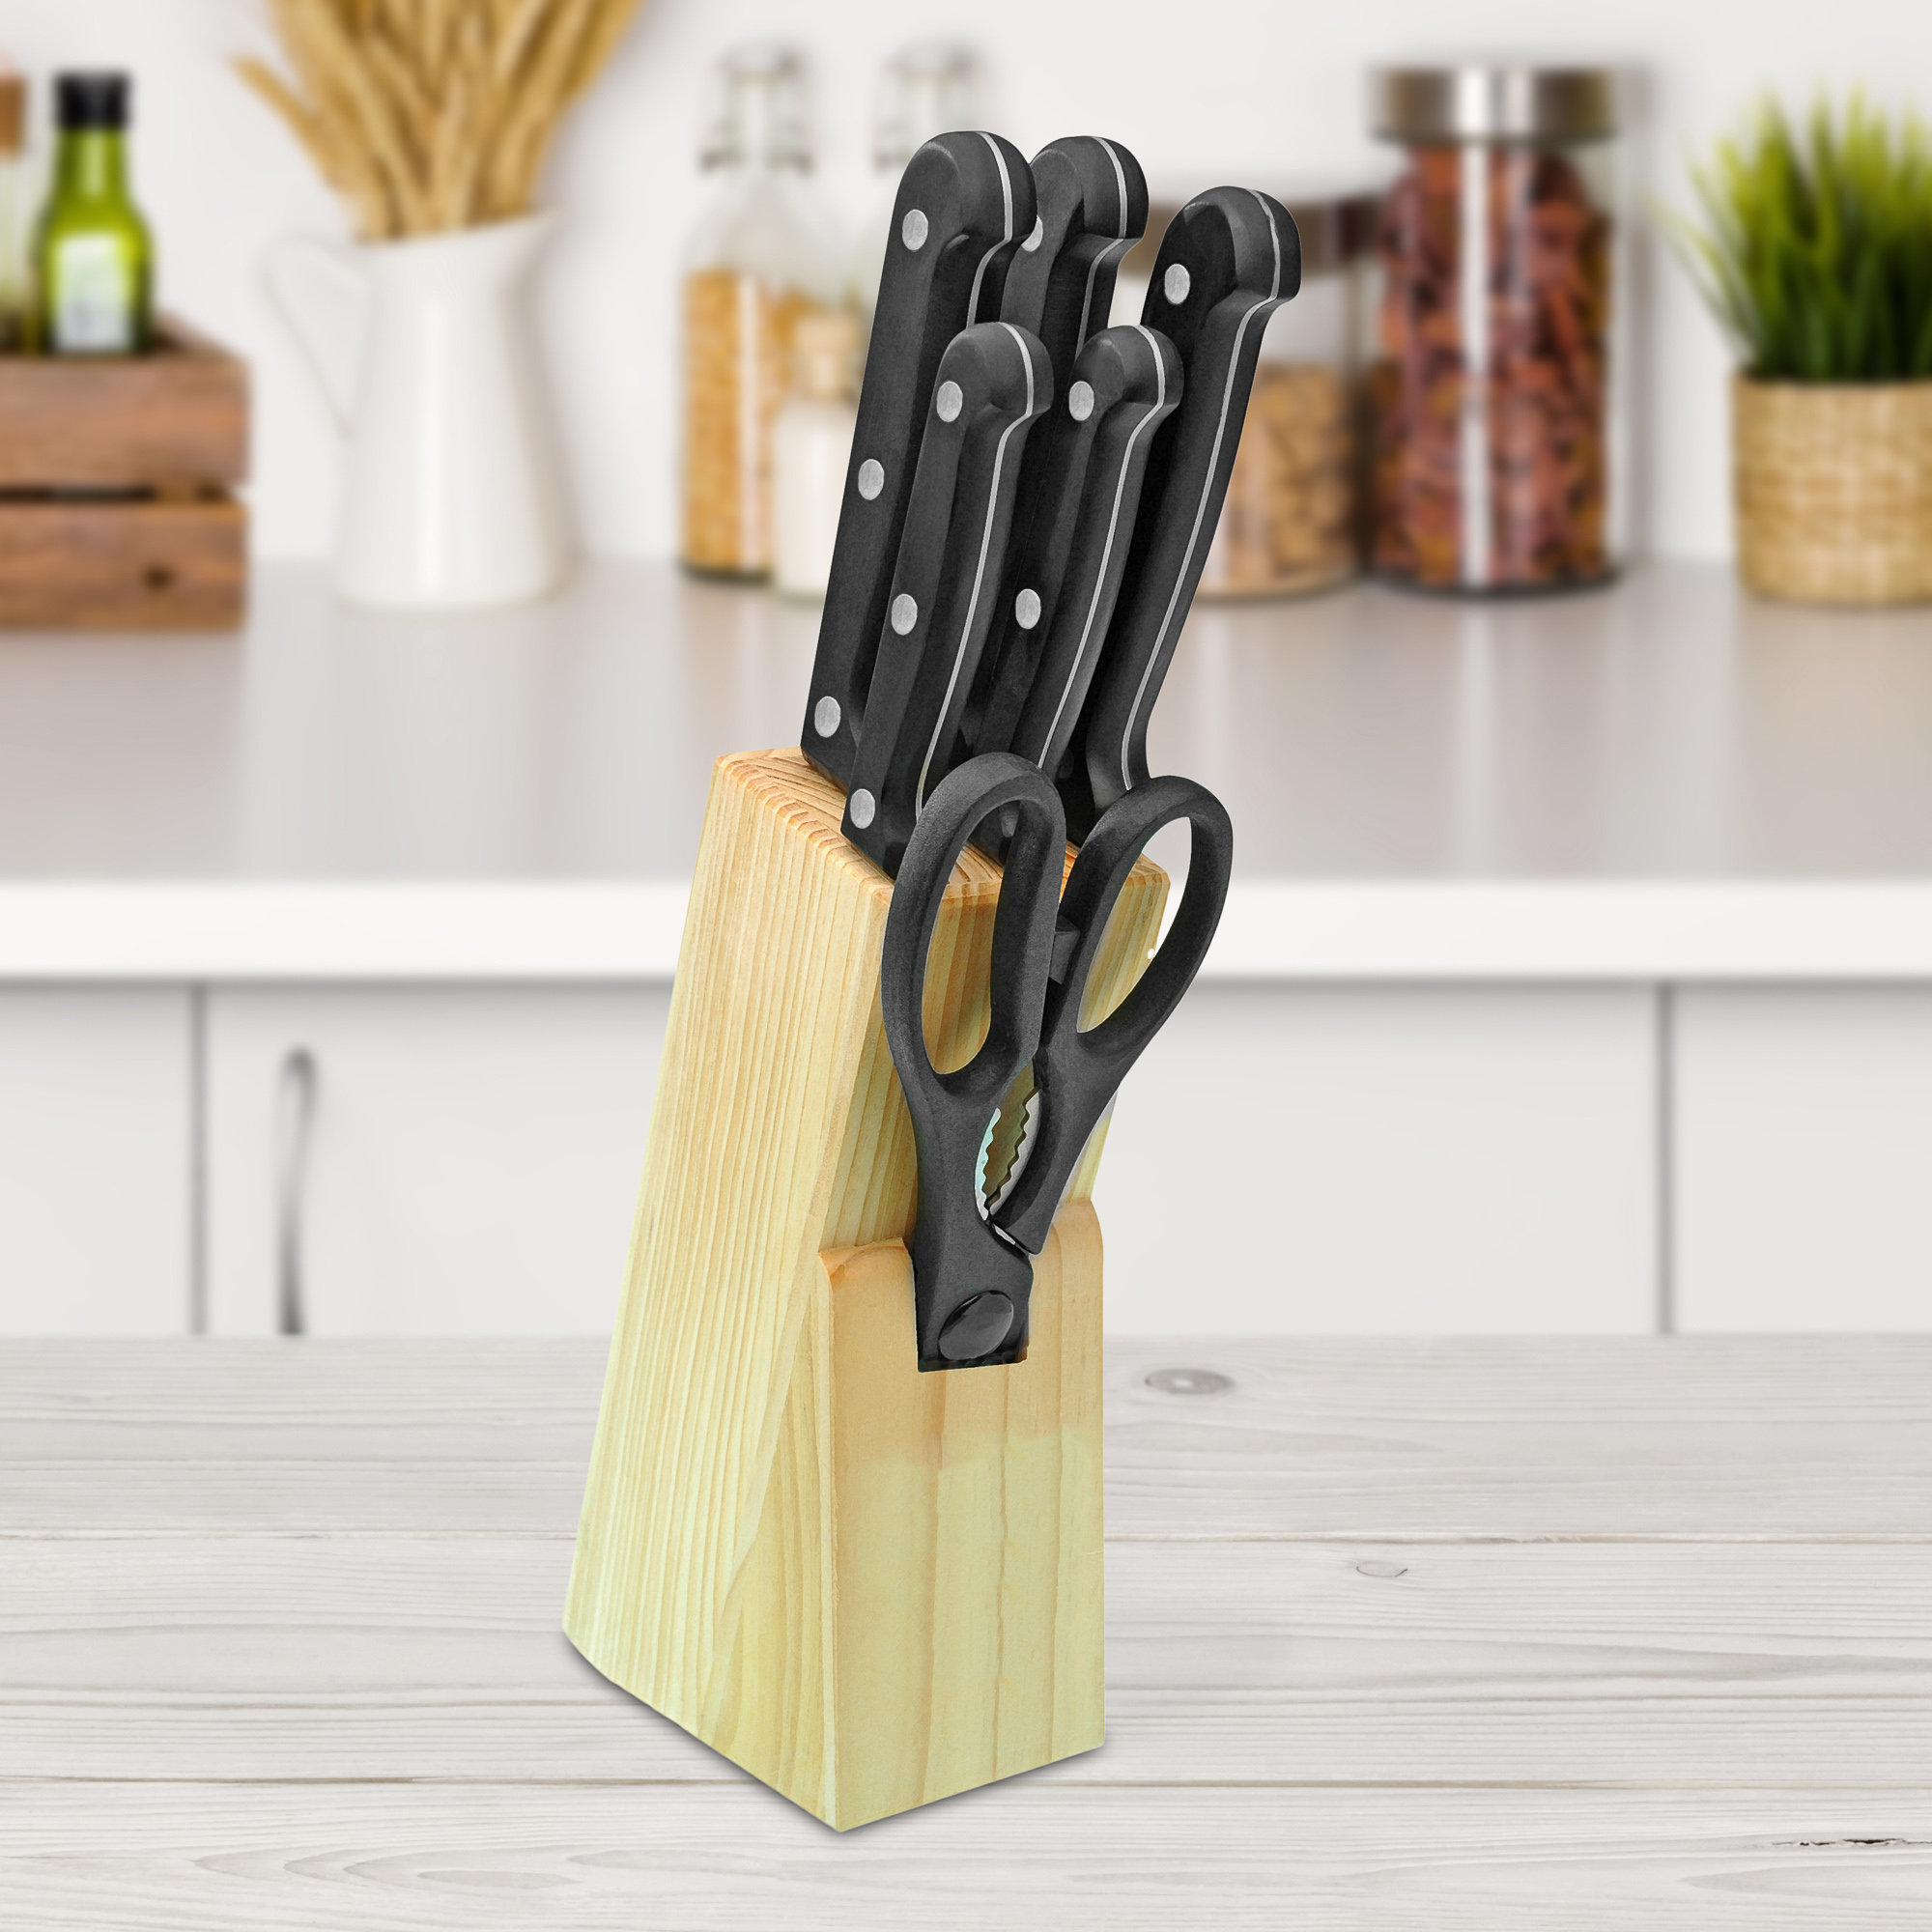 Basic Essentials 12-Piece ABS Triple-Riveted Knife Block Set in Black